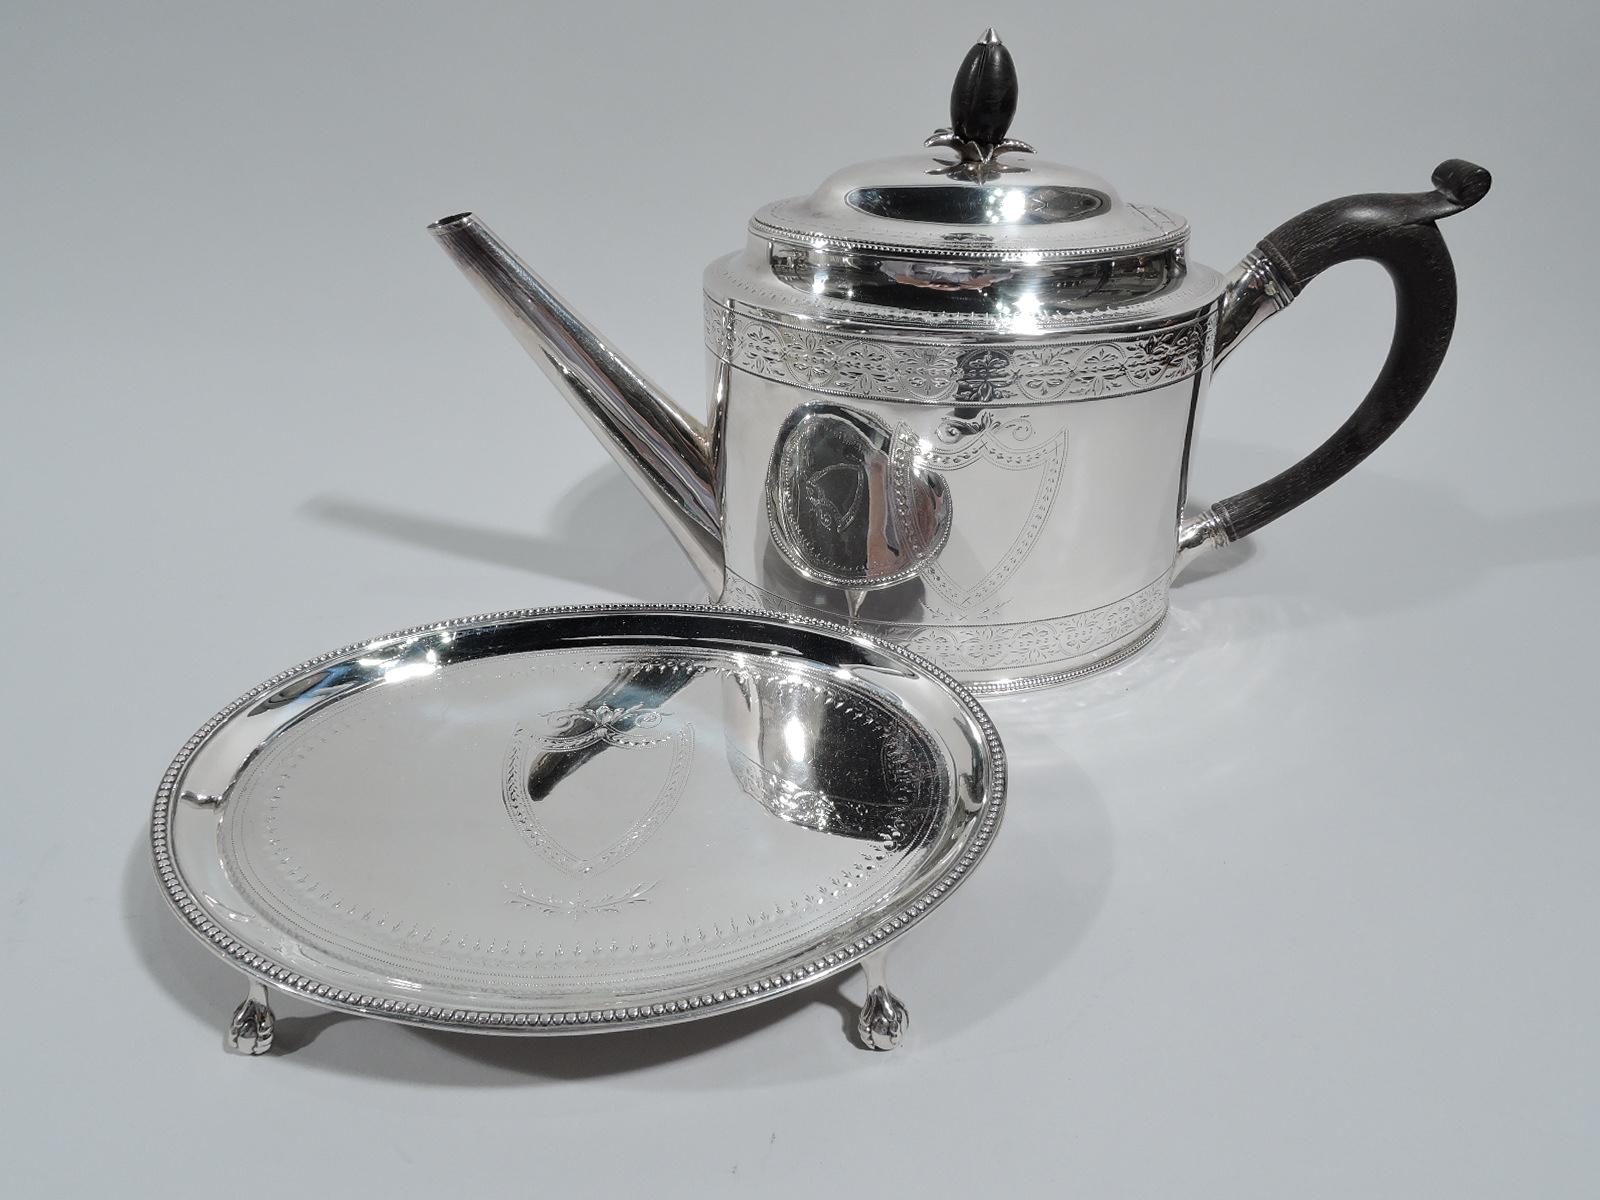 George III sterling silver teapot on stand. Made by Hester Bateman in London in 1789. Teapot: Ovoid body with straight and tapering diagonal spout and capped looping handle. Cover hinged and raised with leaf-mounted ovoid stained-wood finial. Stand: